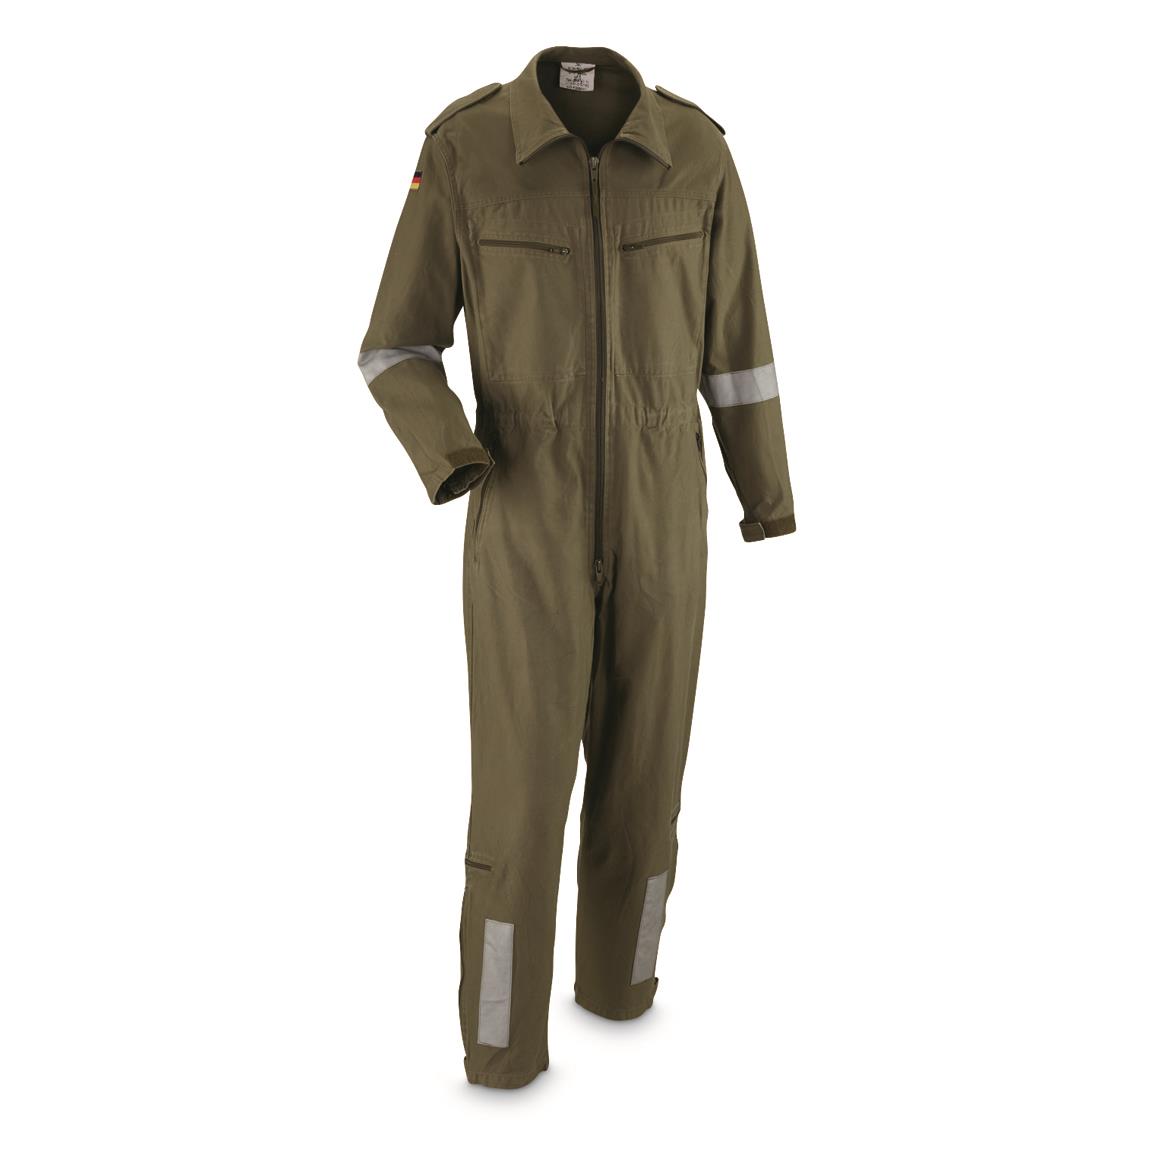 Army Mechanic Coveralls - Army Military